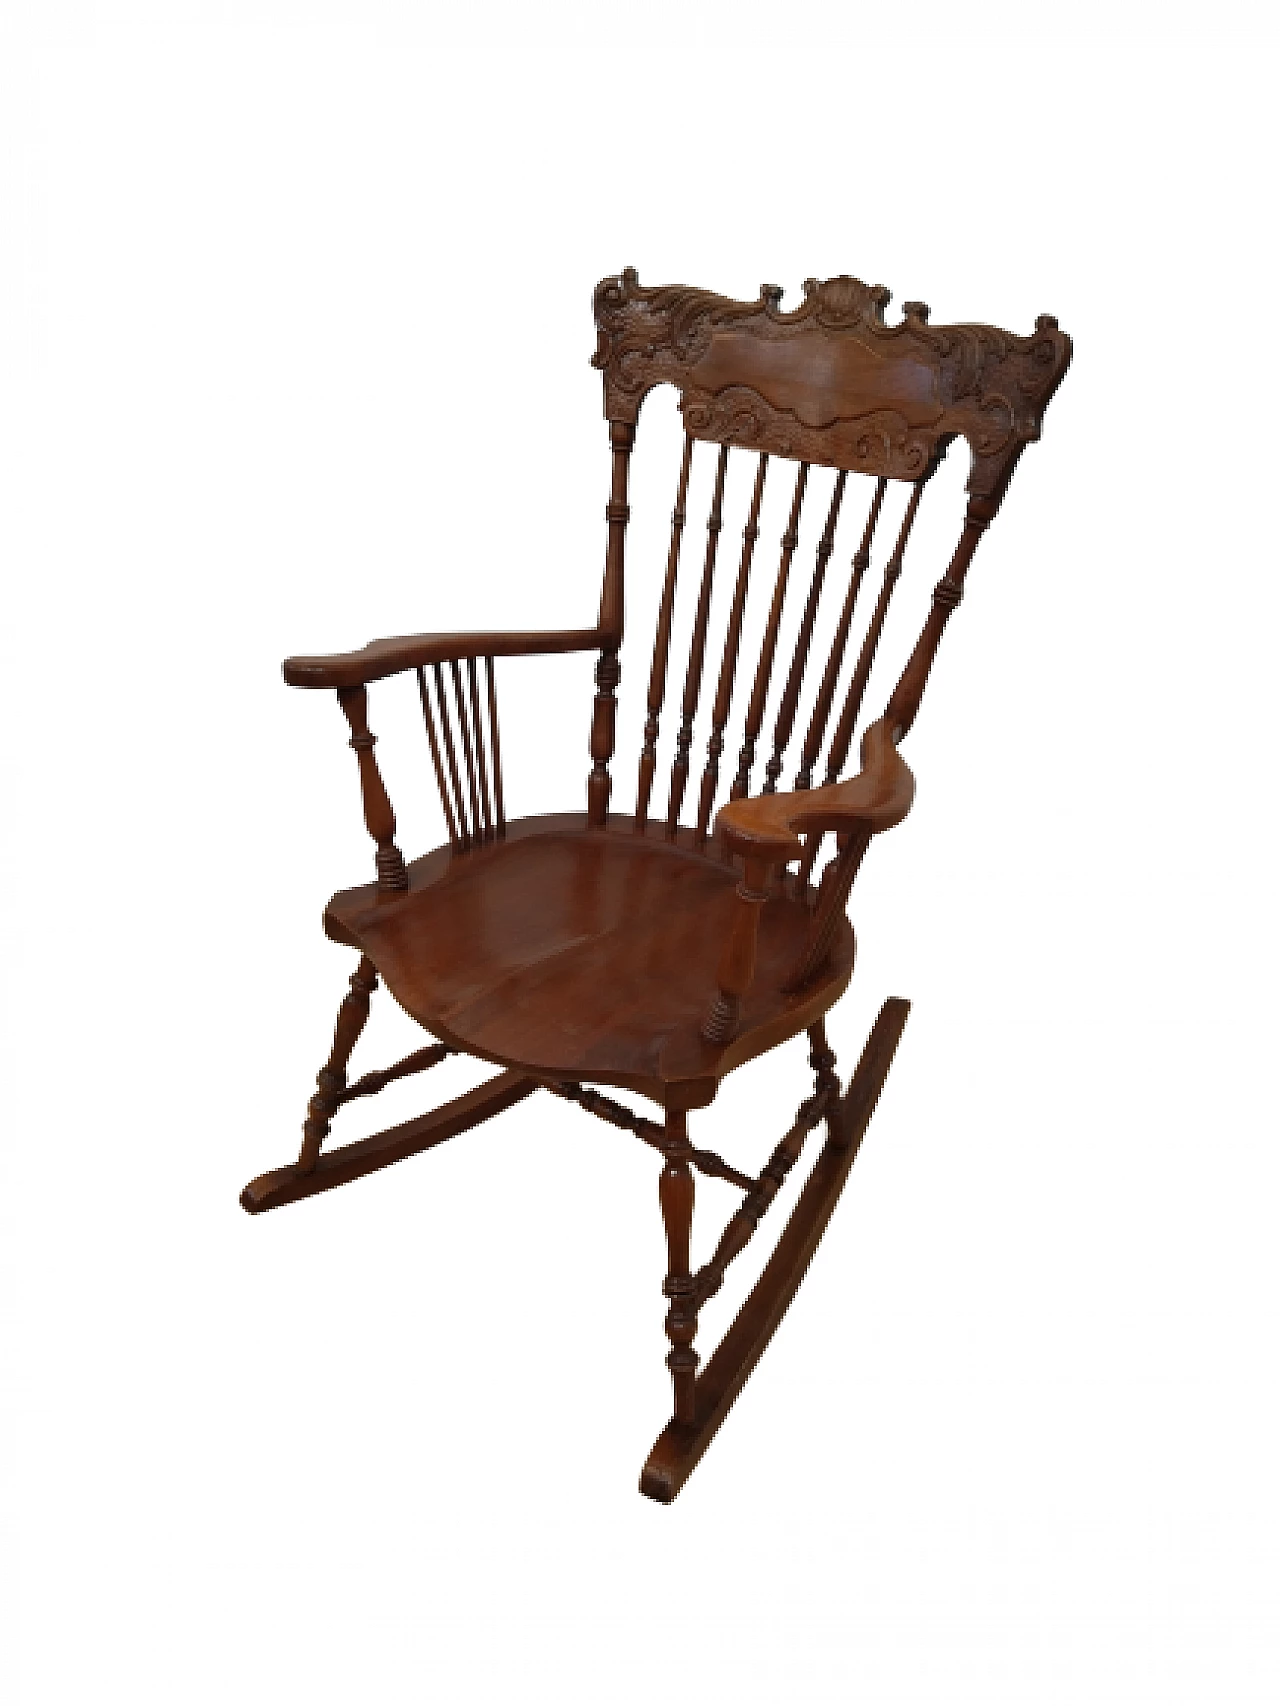 Walnut-stained beech rocking chair 16